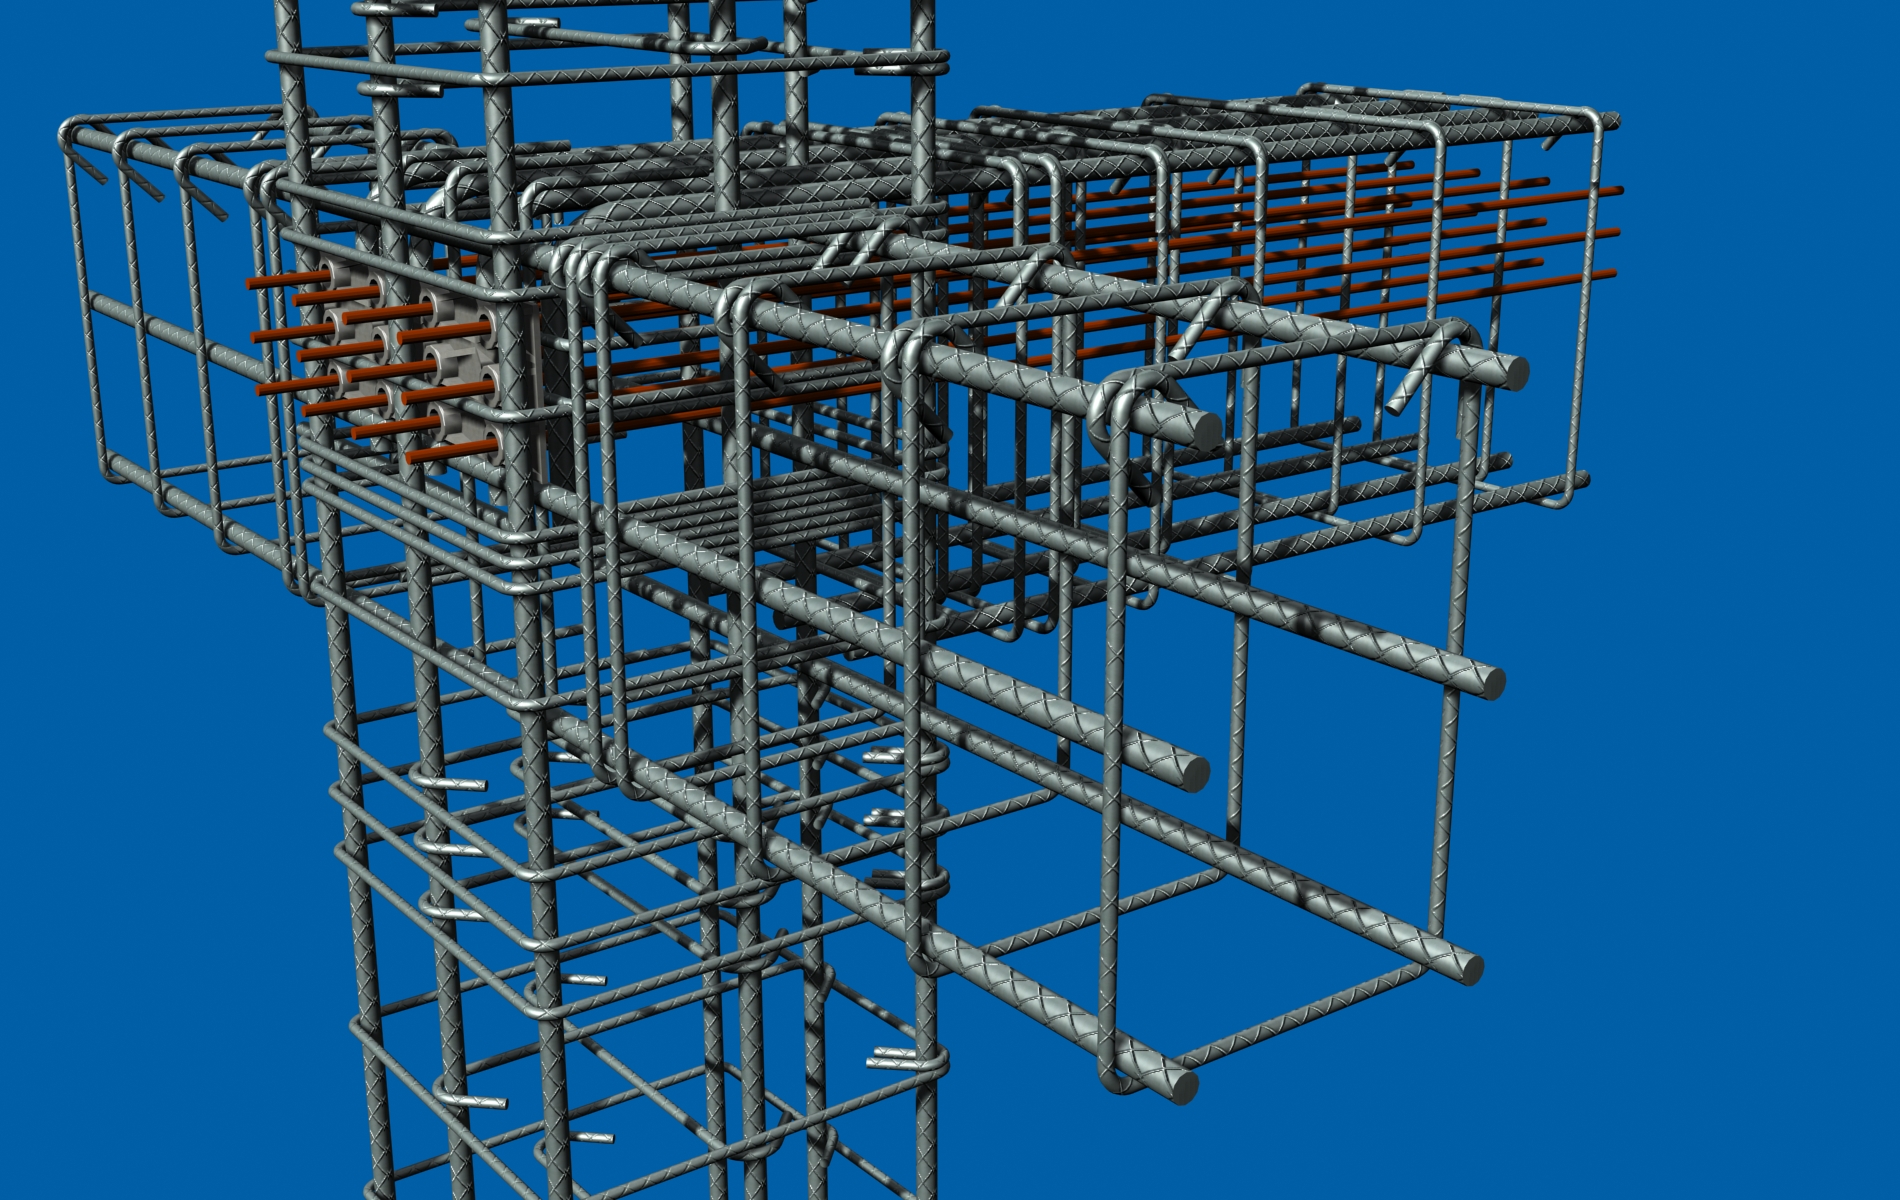 Structural engineering firms are addressing the disconnect between the potential of BIM and the status quo by taking the steps necessary to create advanced model-based deliverables.